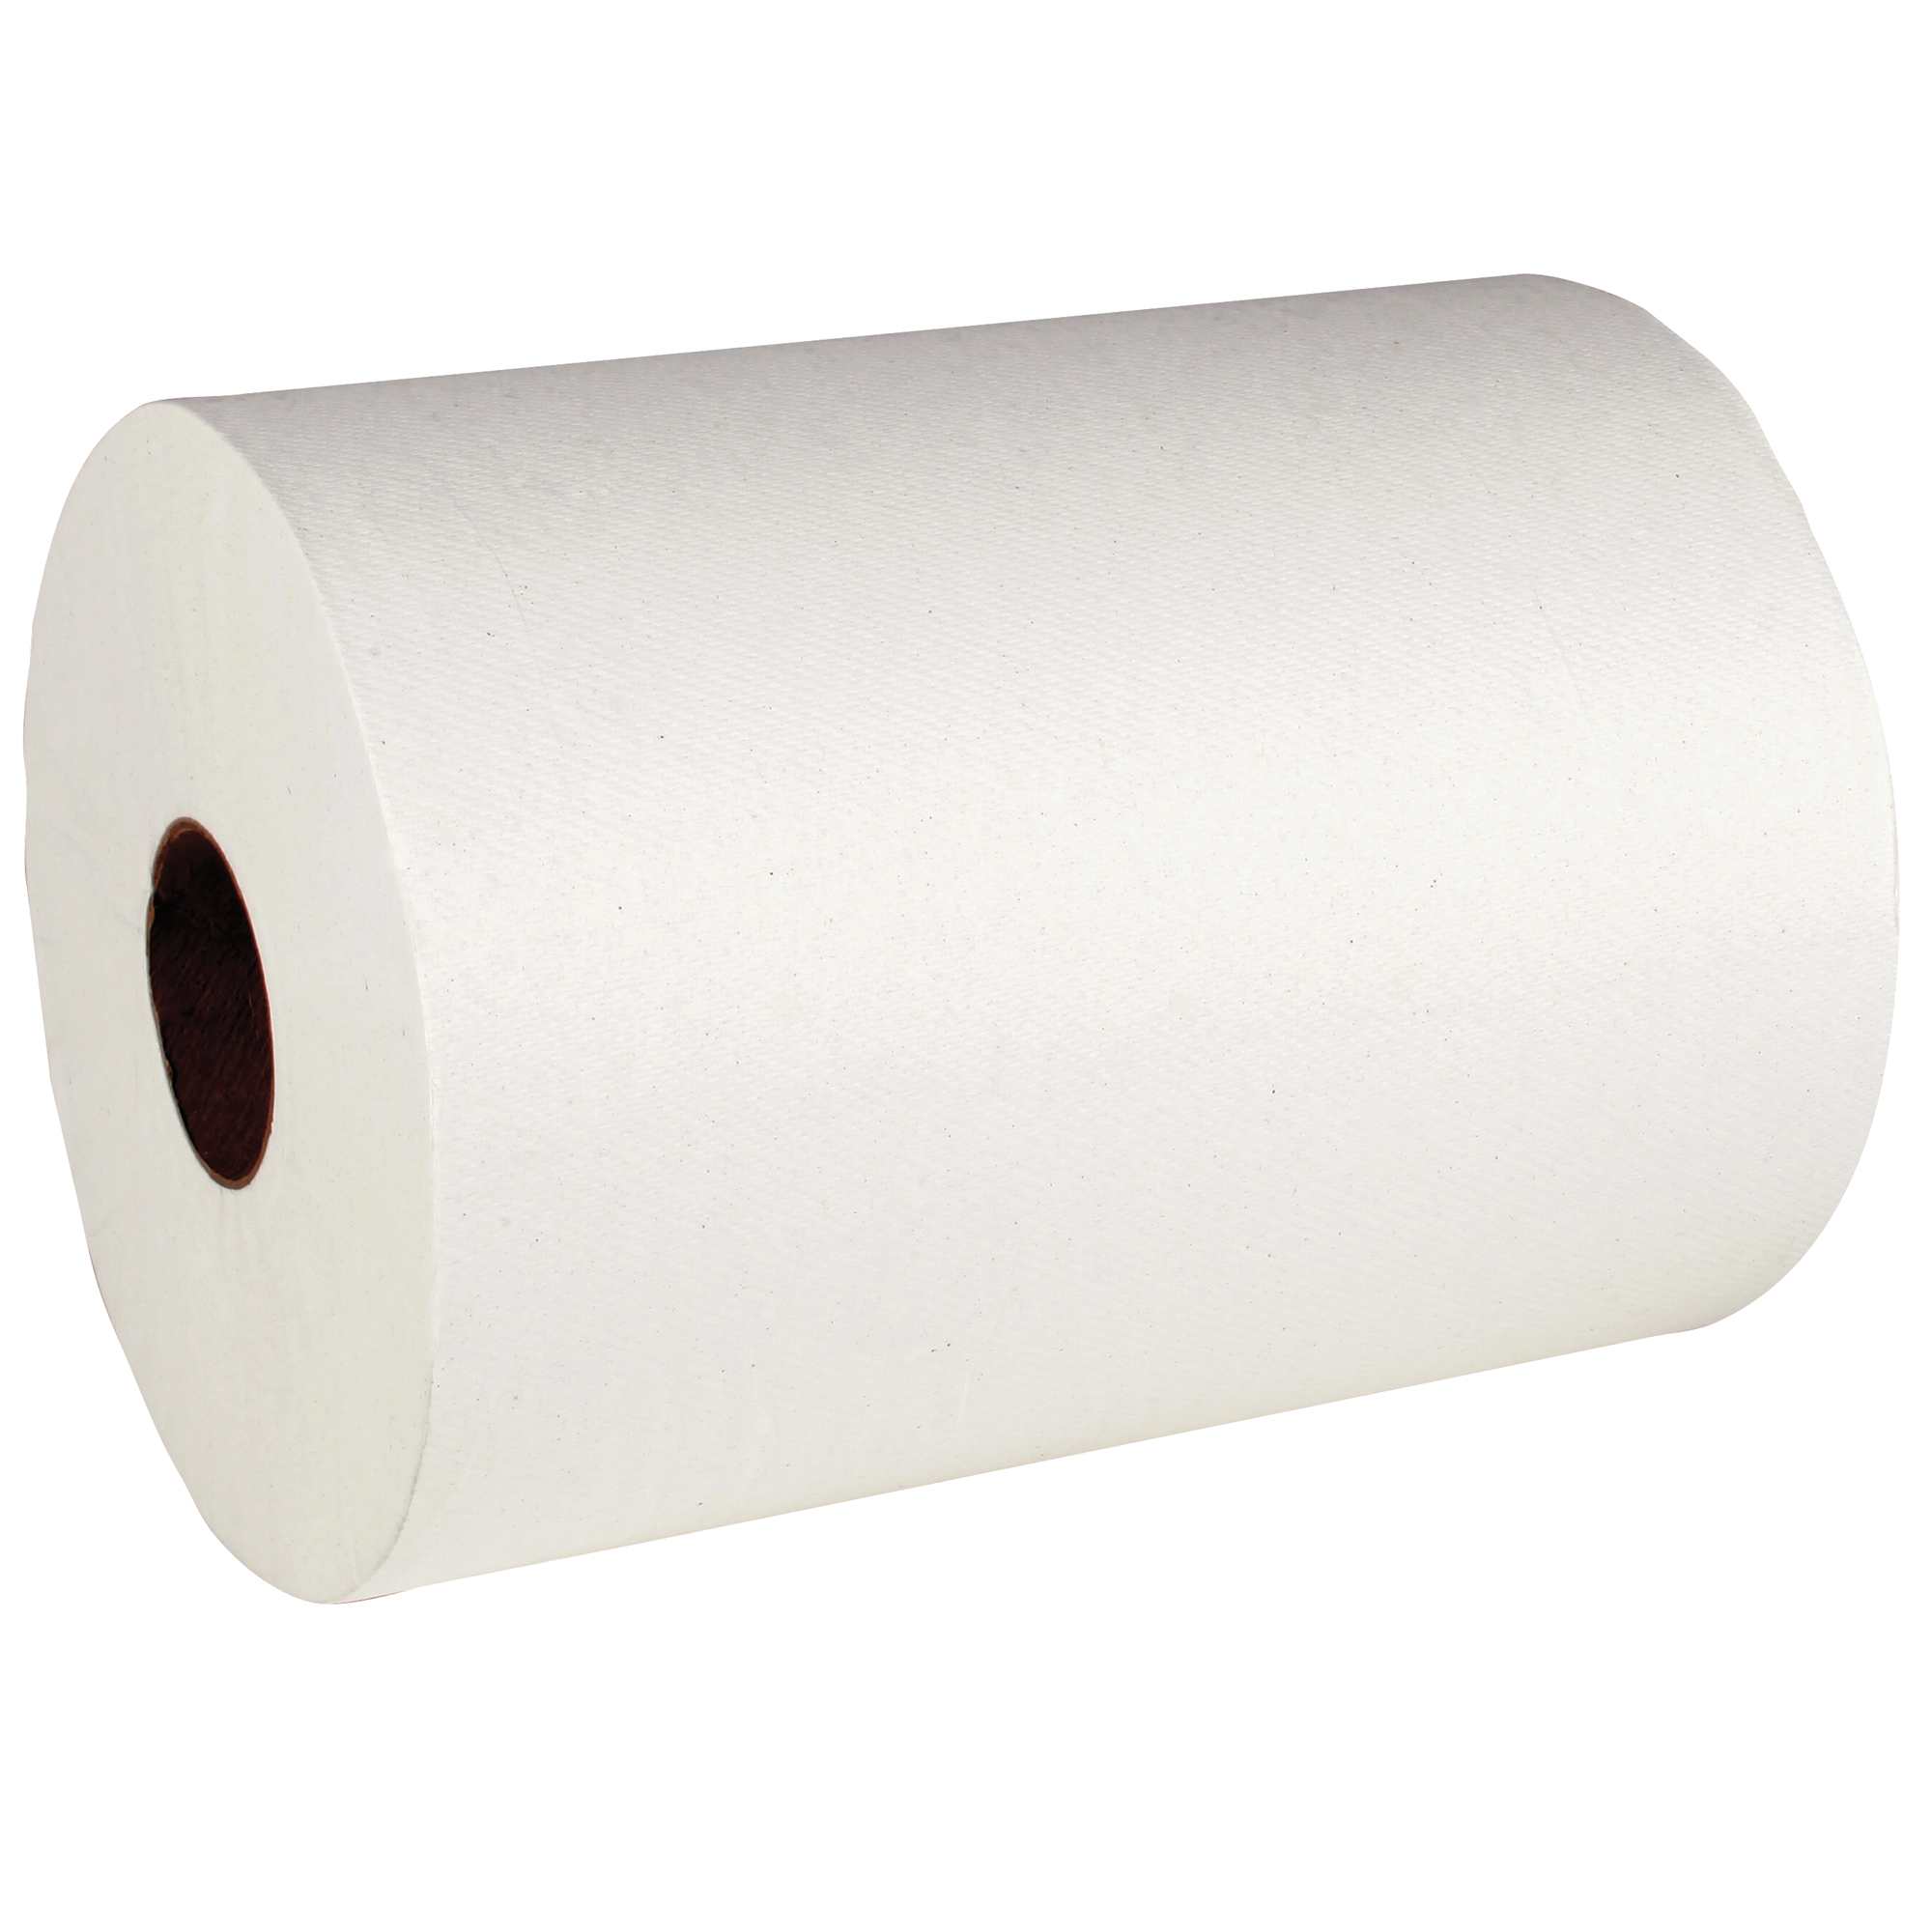 Picture of Slimroll Hard Roll Towels, Absorbency Pockets, 8" x 580ft, White, 6 Rolls/Carton